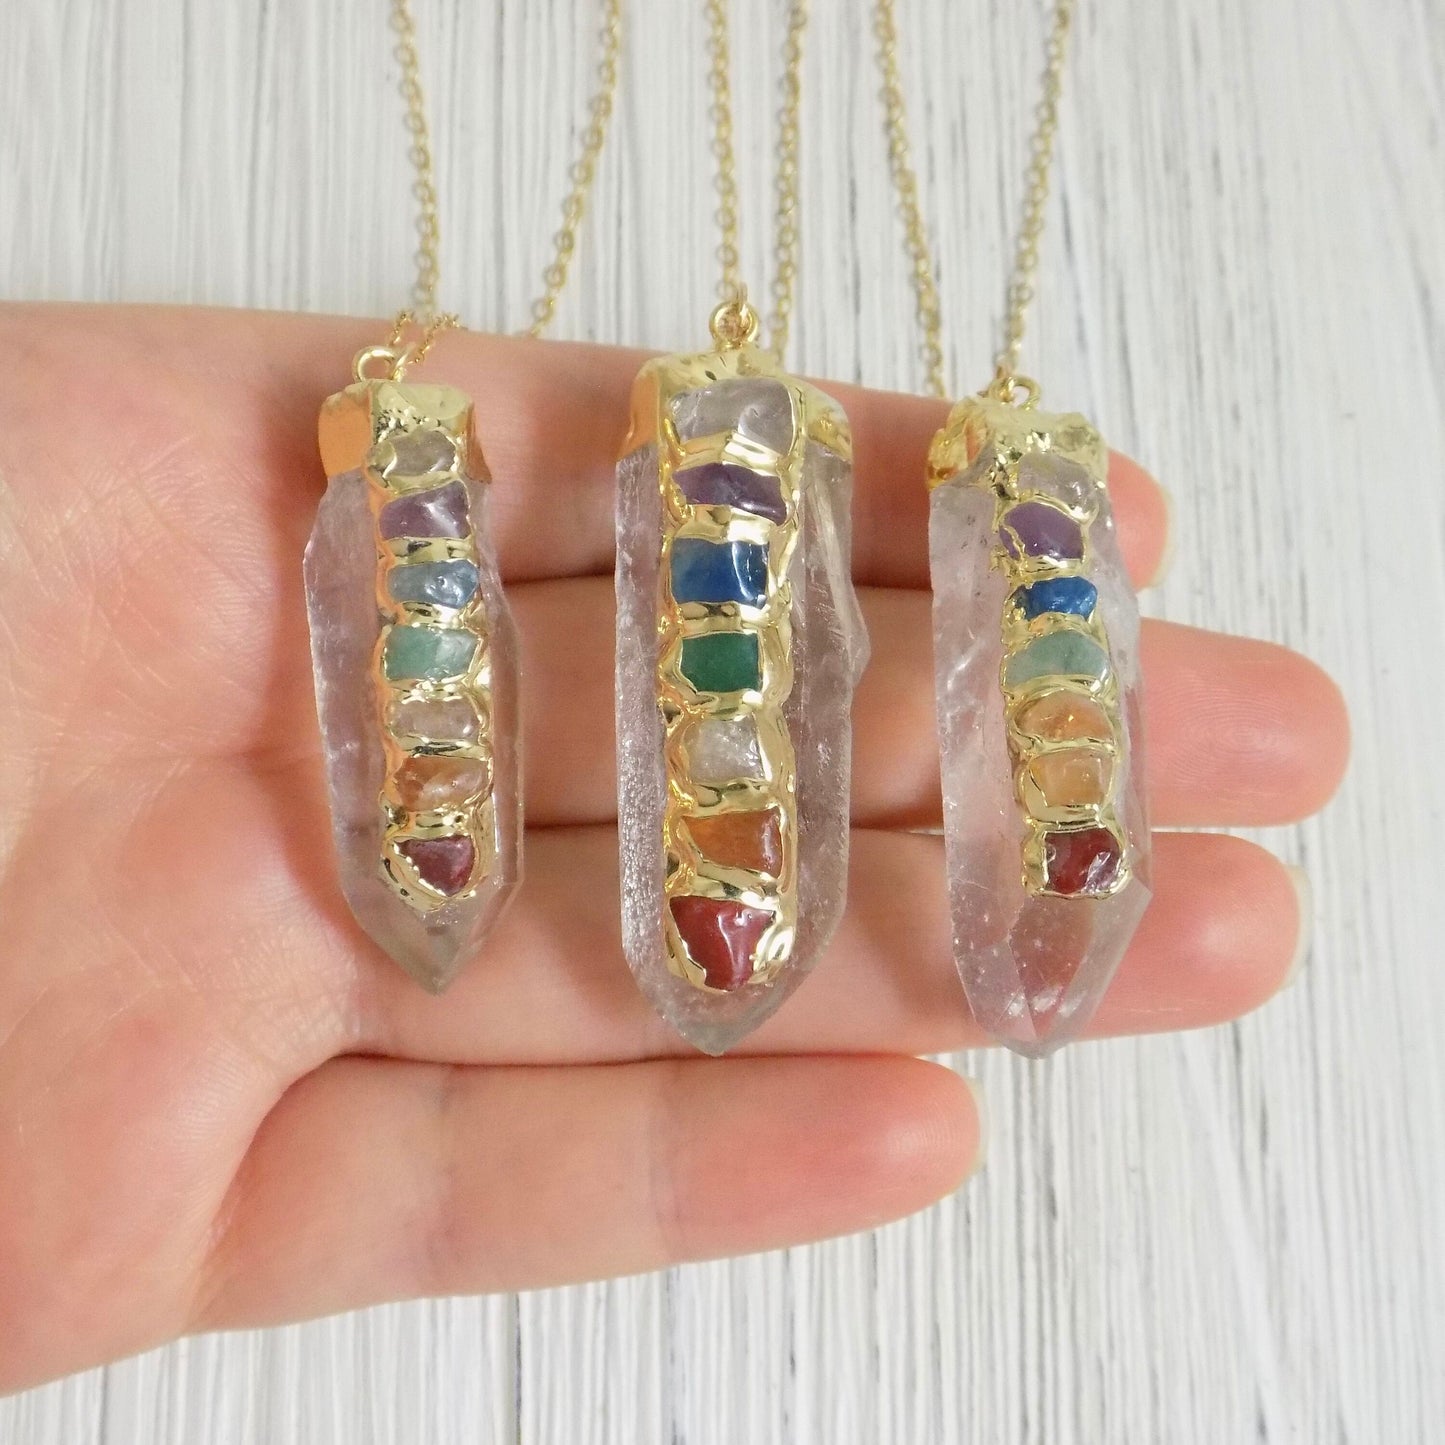 Gift Women - 7 Chakra Necklace - Clear Crystal Necklace Gold - Yoga Necklace - Boho Necklace Long - Christmas Gift - G12-66